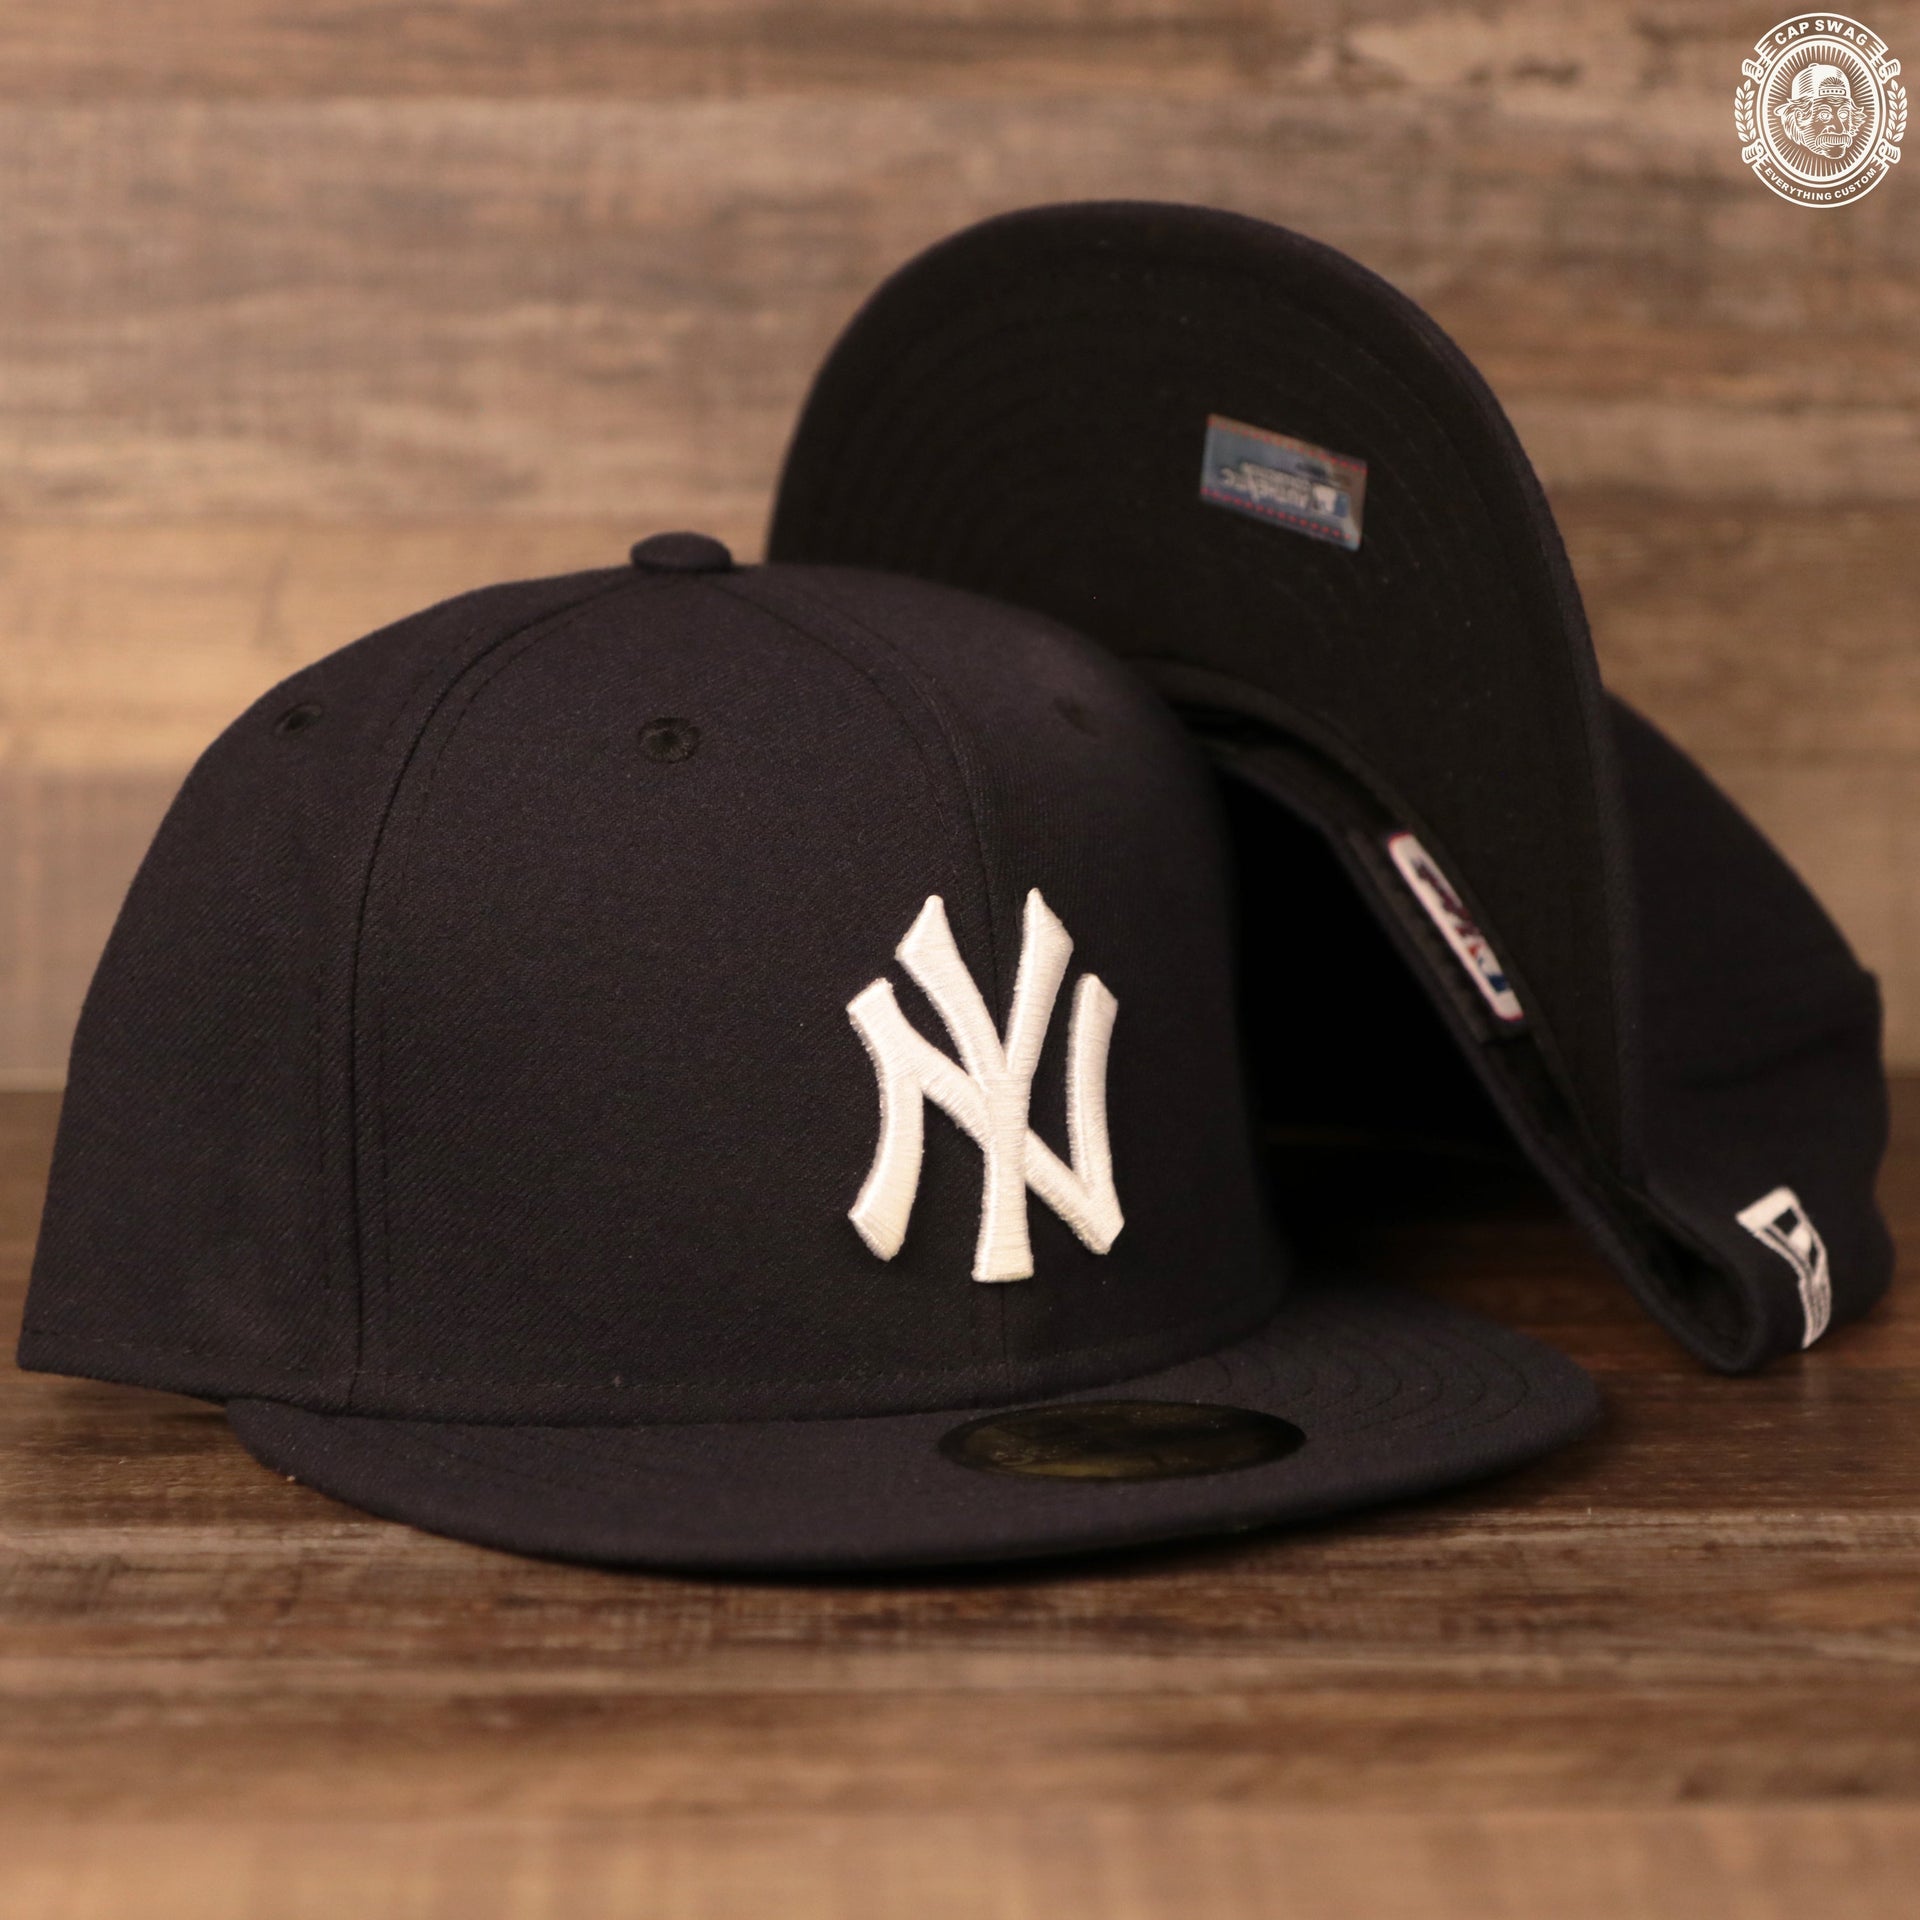 Top and bottom view of the NY Yankees On Field Youth Black Bottom 59Fifty